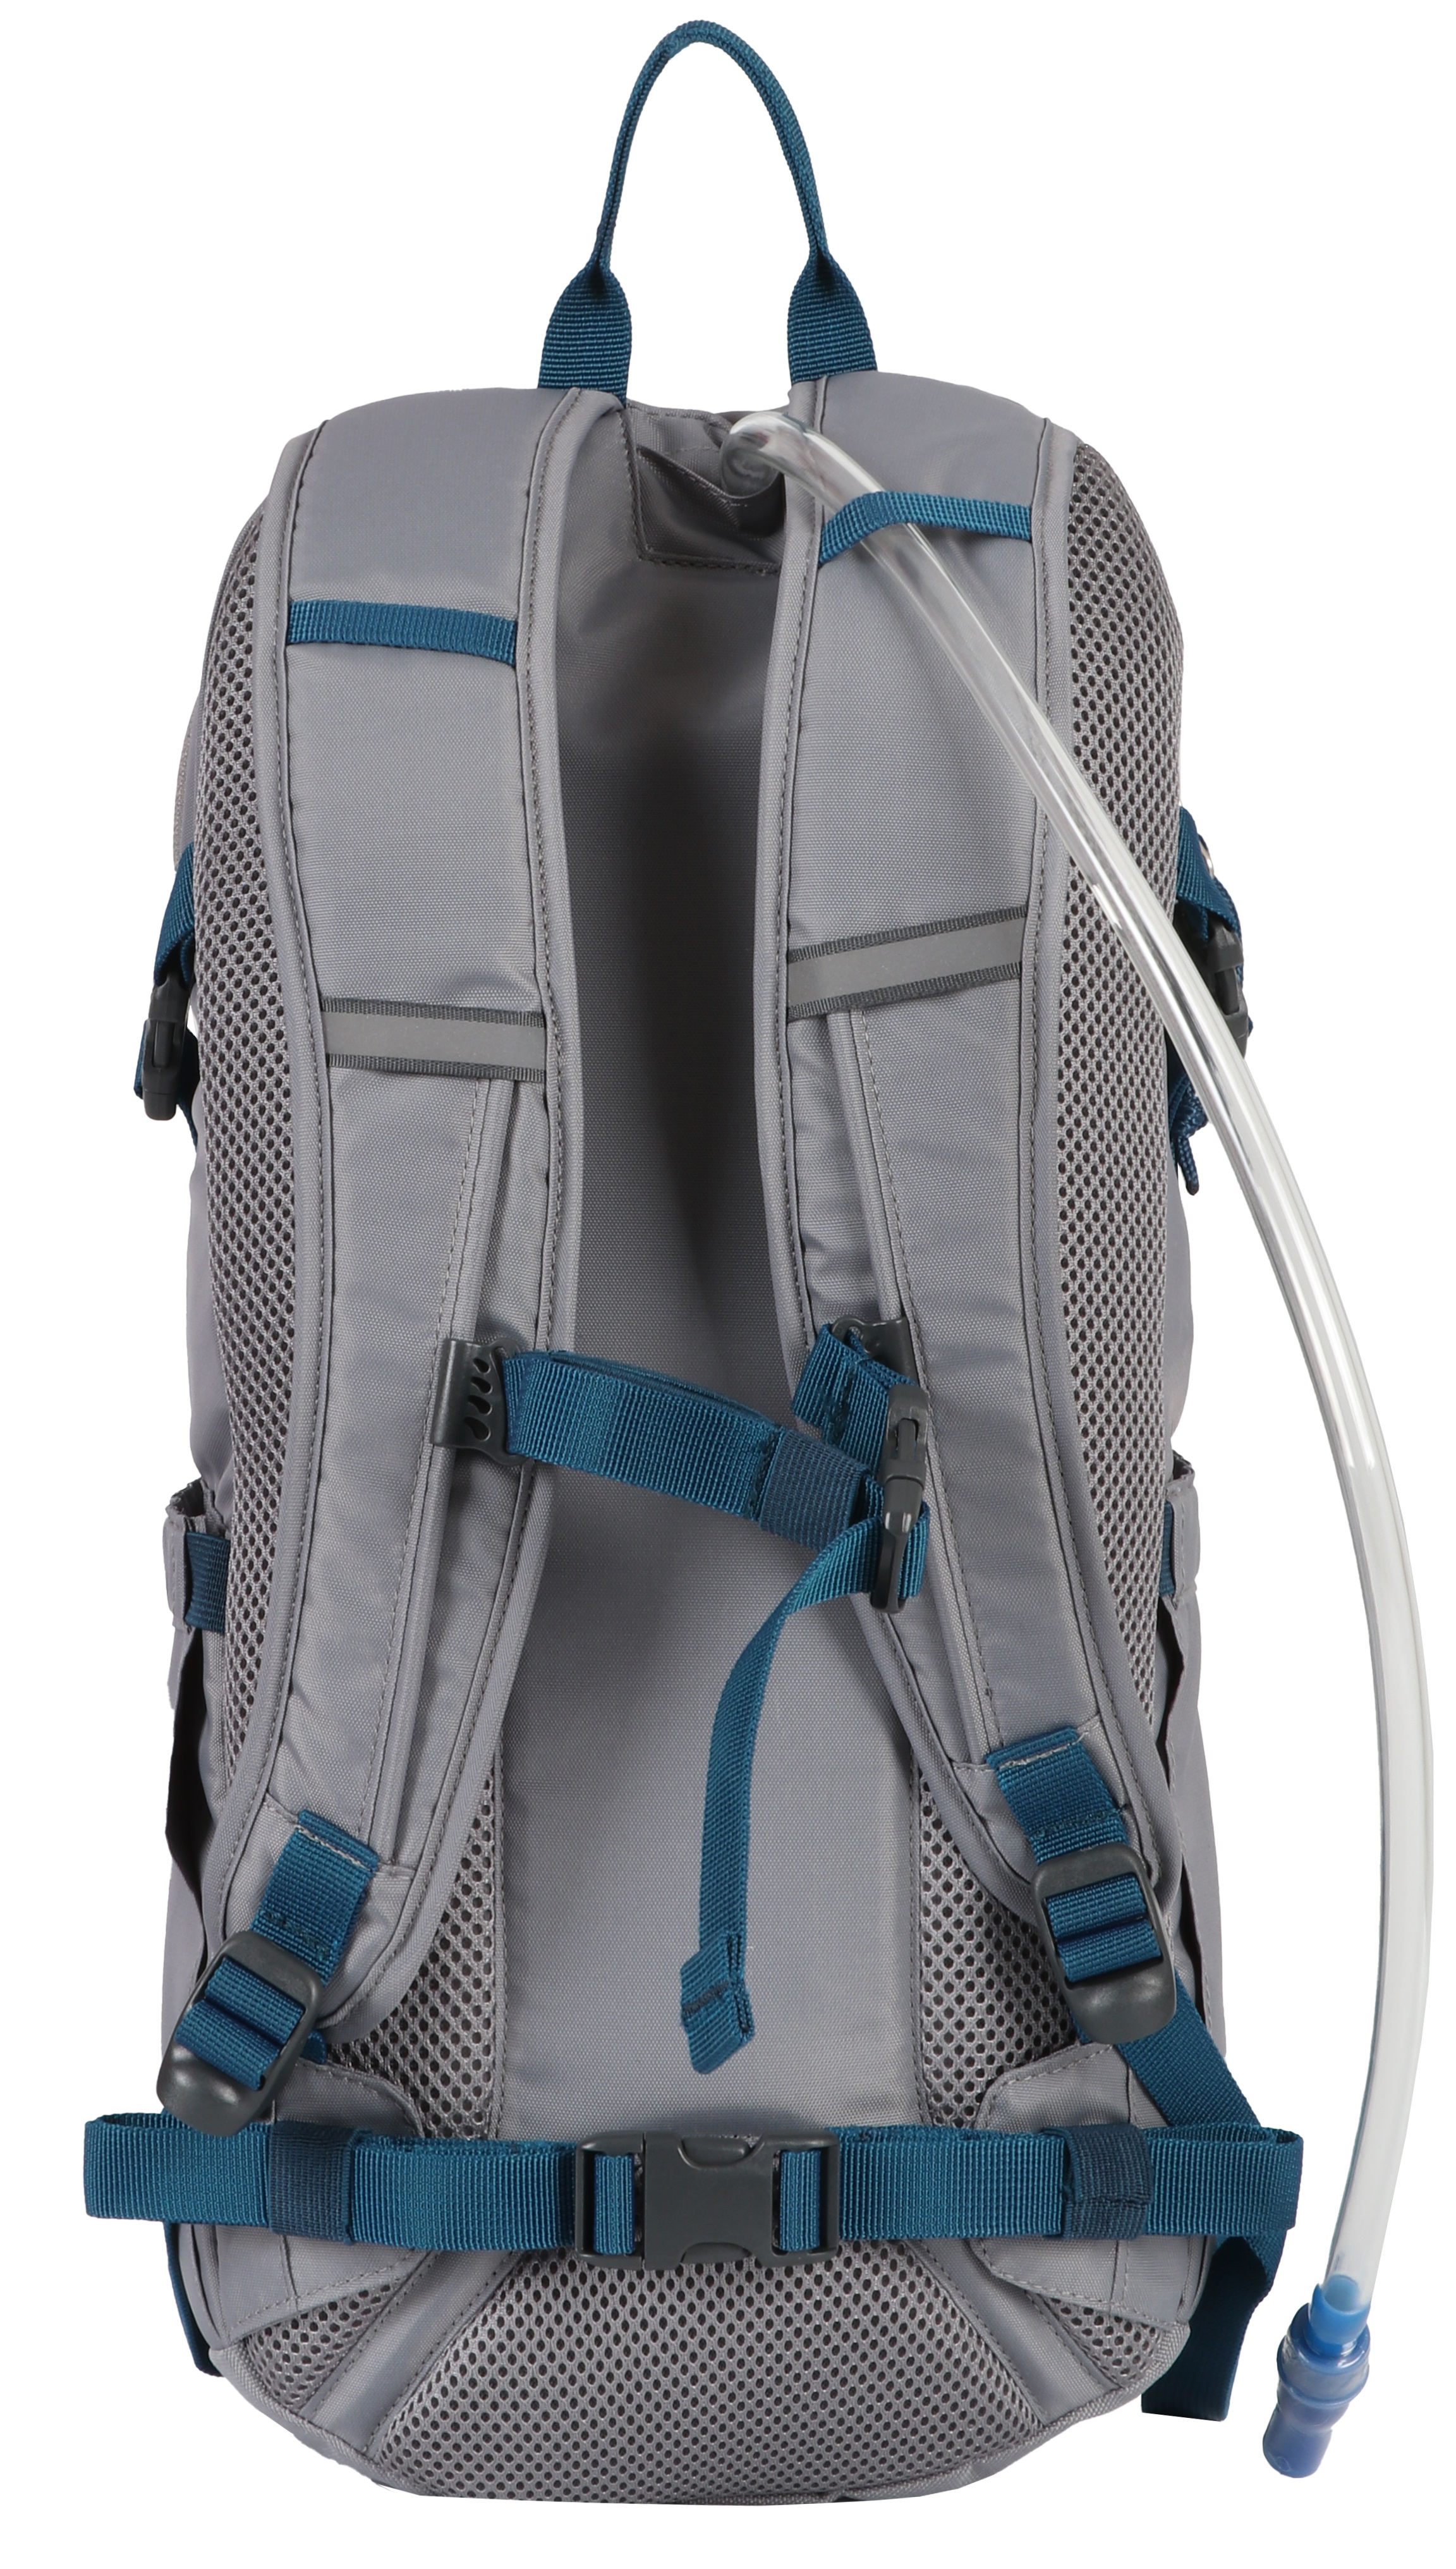 Ozark Trail 14 Ltr Hydration Pack, with Water Reservoir, Grey Polyester - image 5 of 10